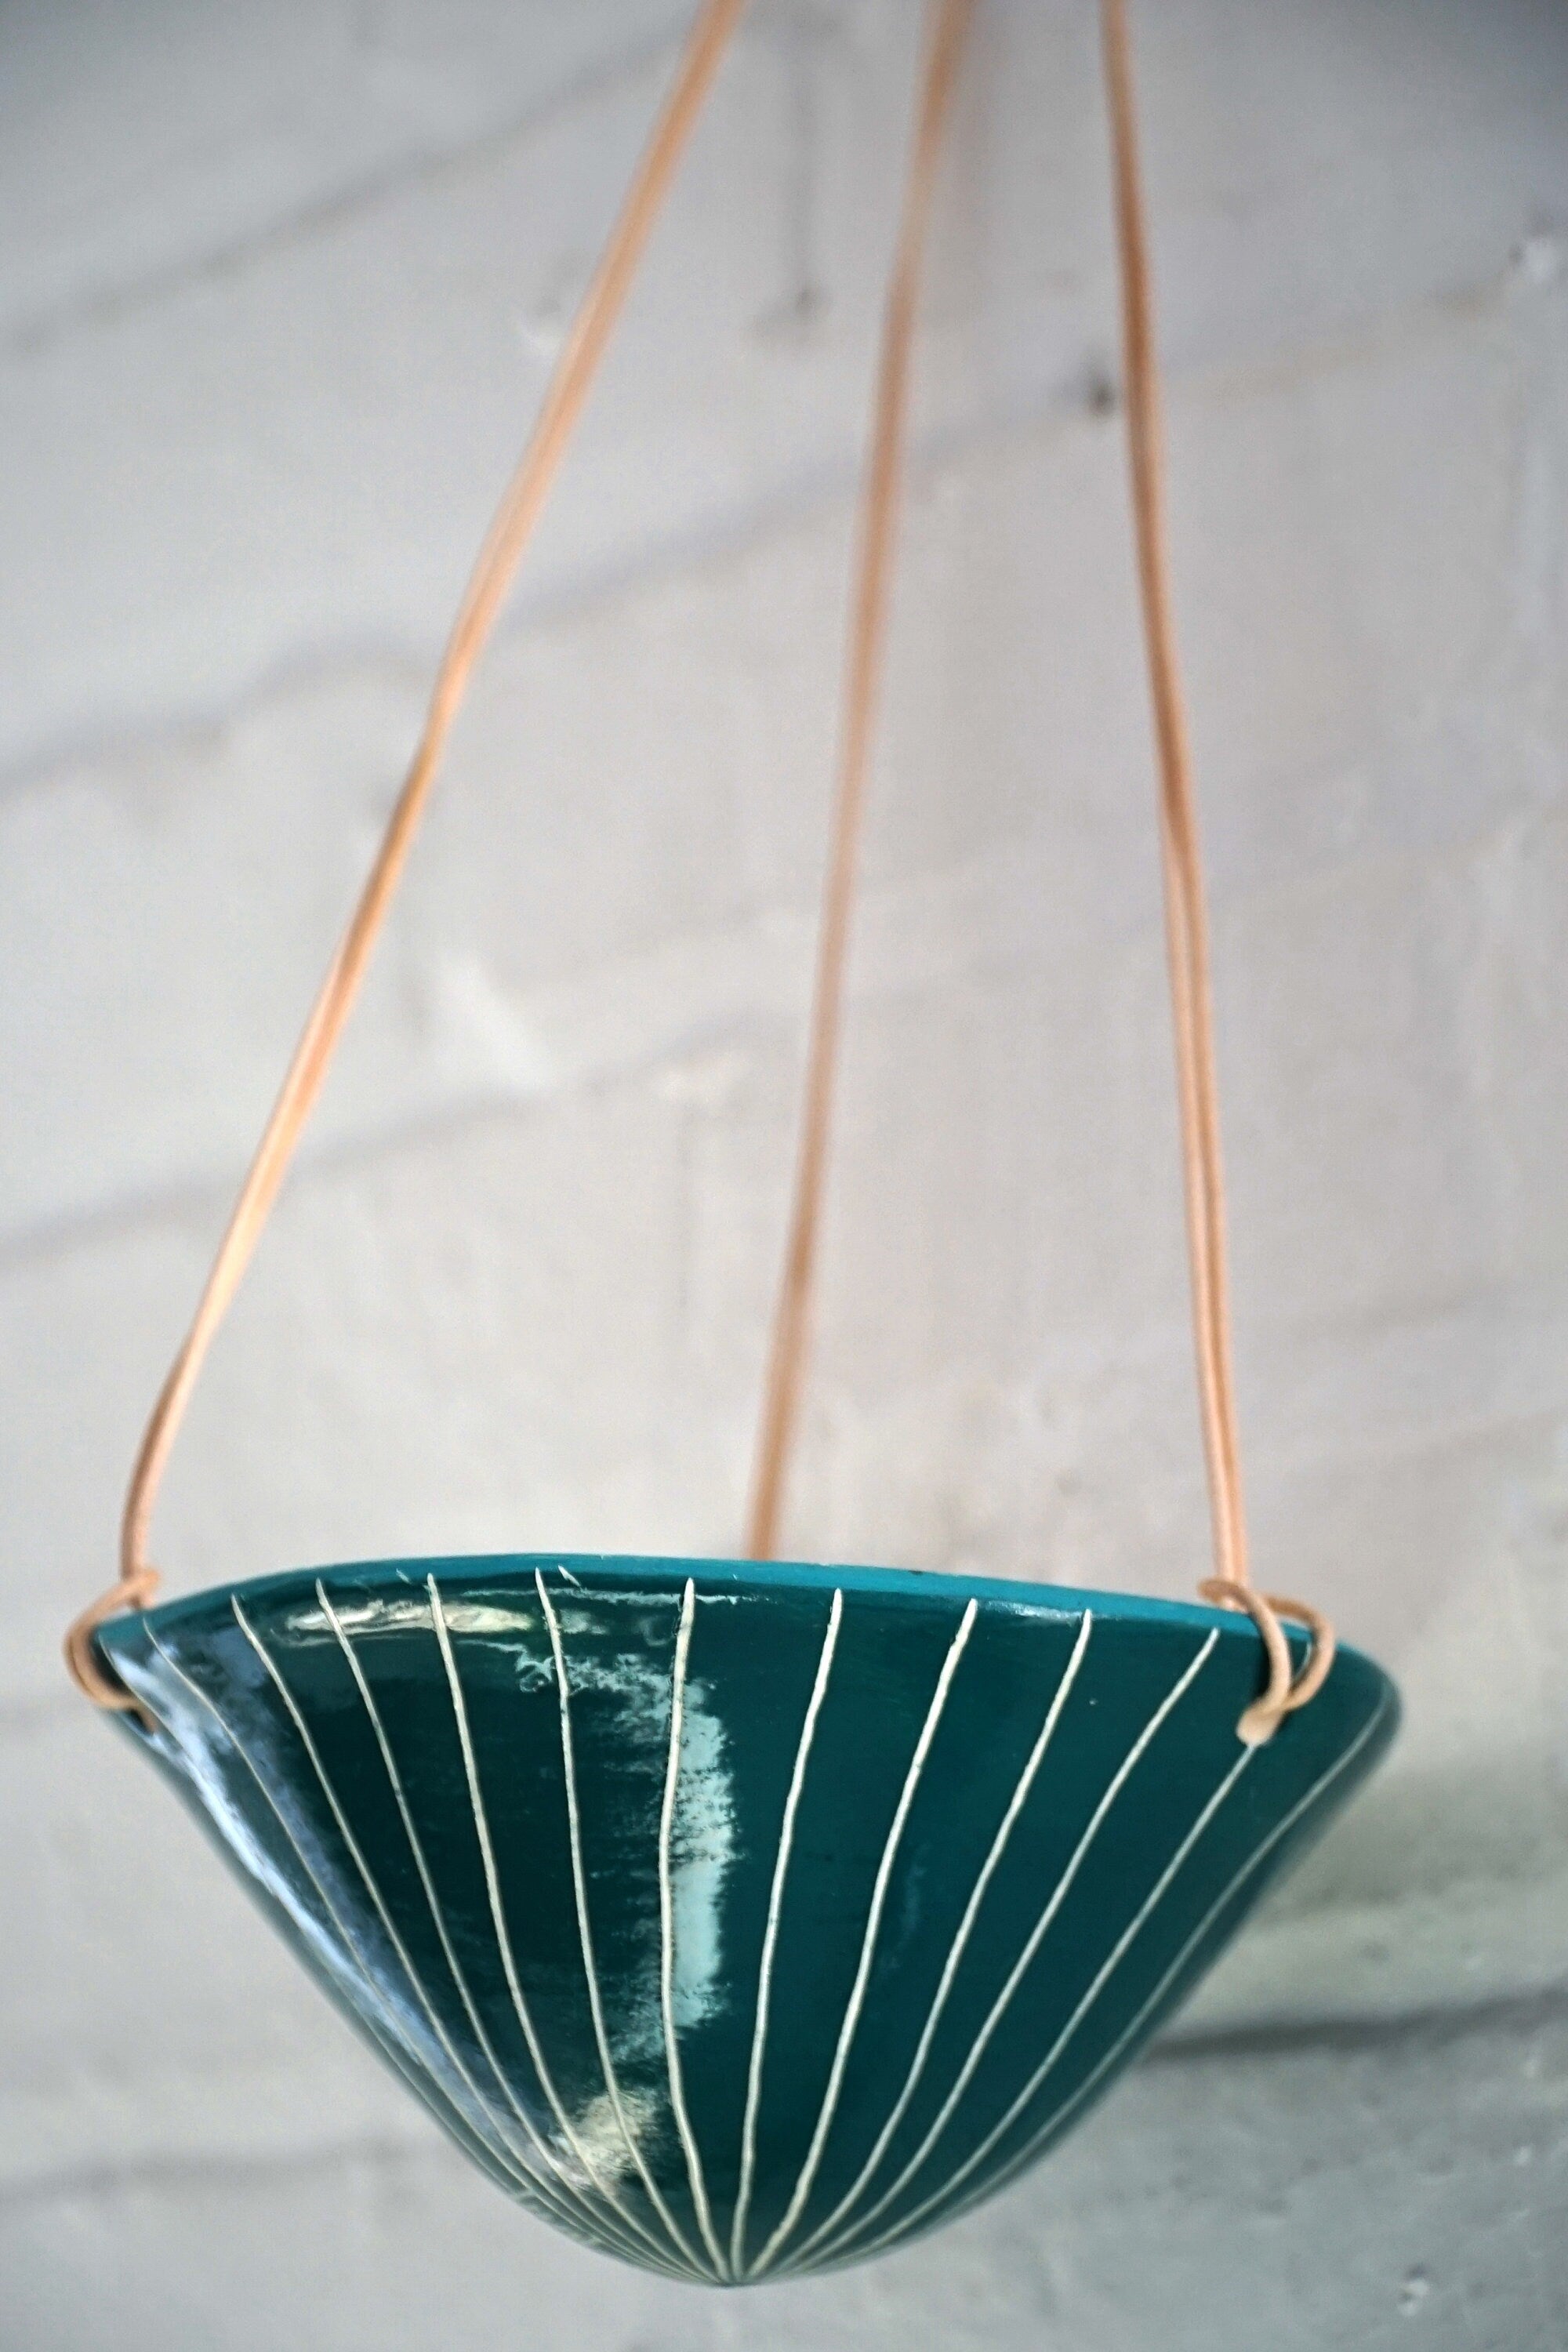 Teal & White Mini Hanging Planter w/ "Vertical Line" Design - Small Hanging Pot with Carved Design - Propagating, Starter Pot, Air Plant Pot